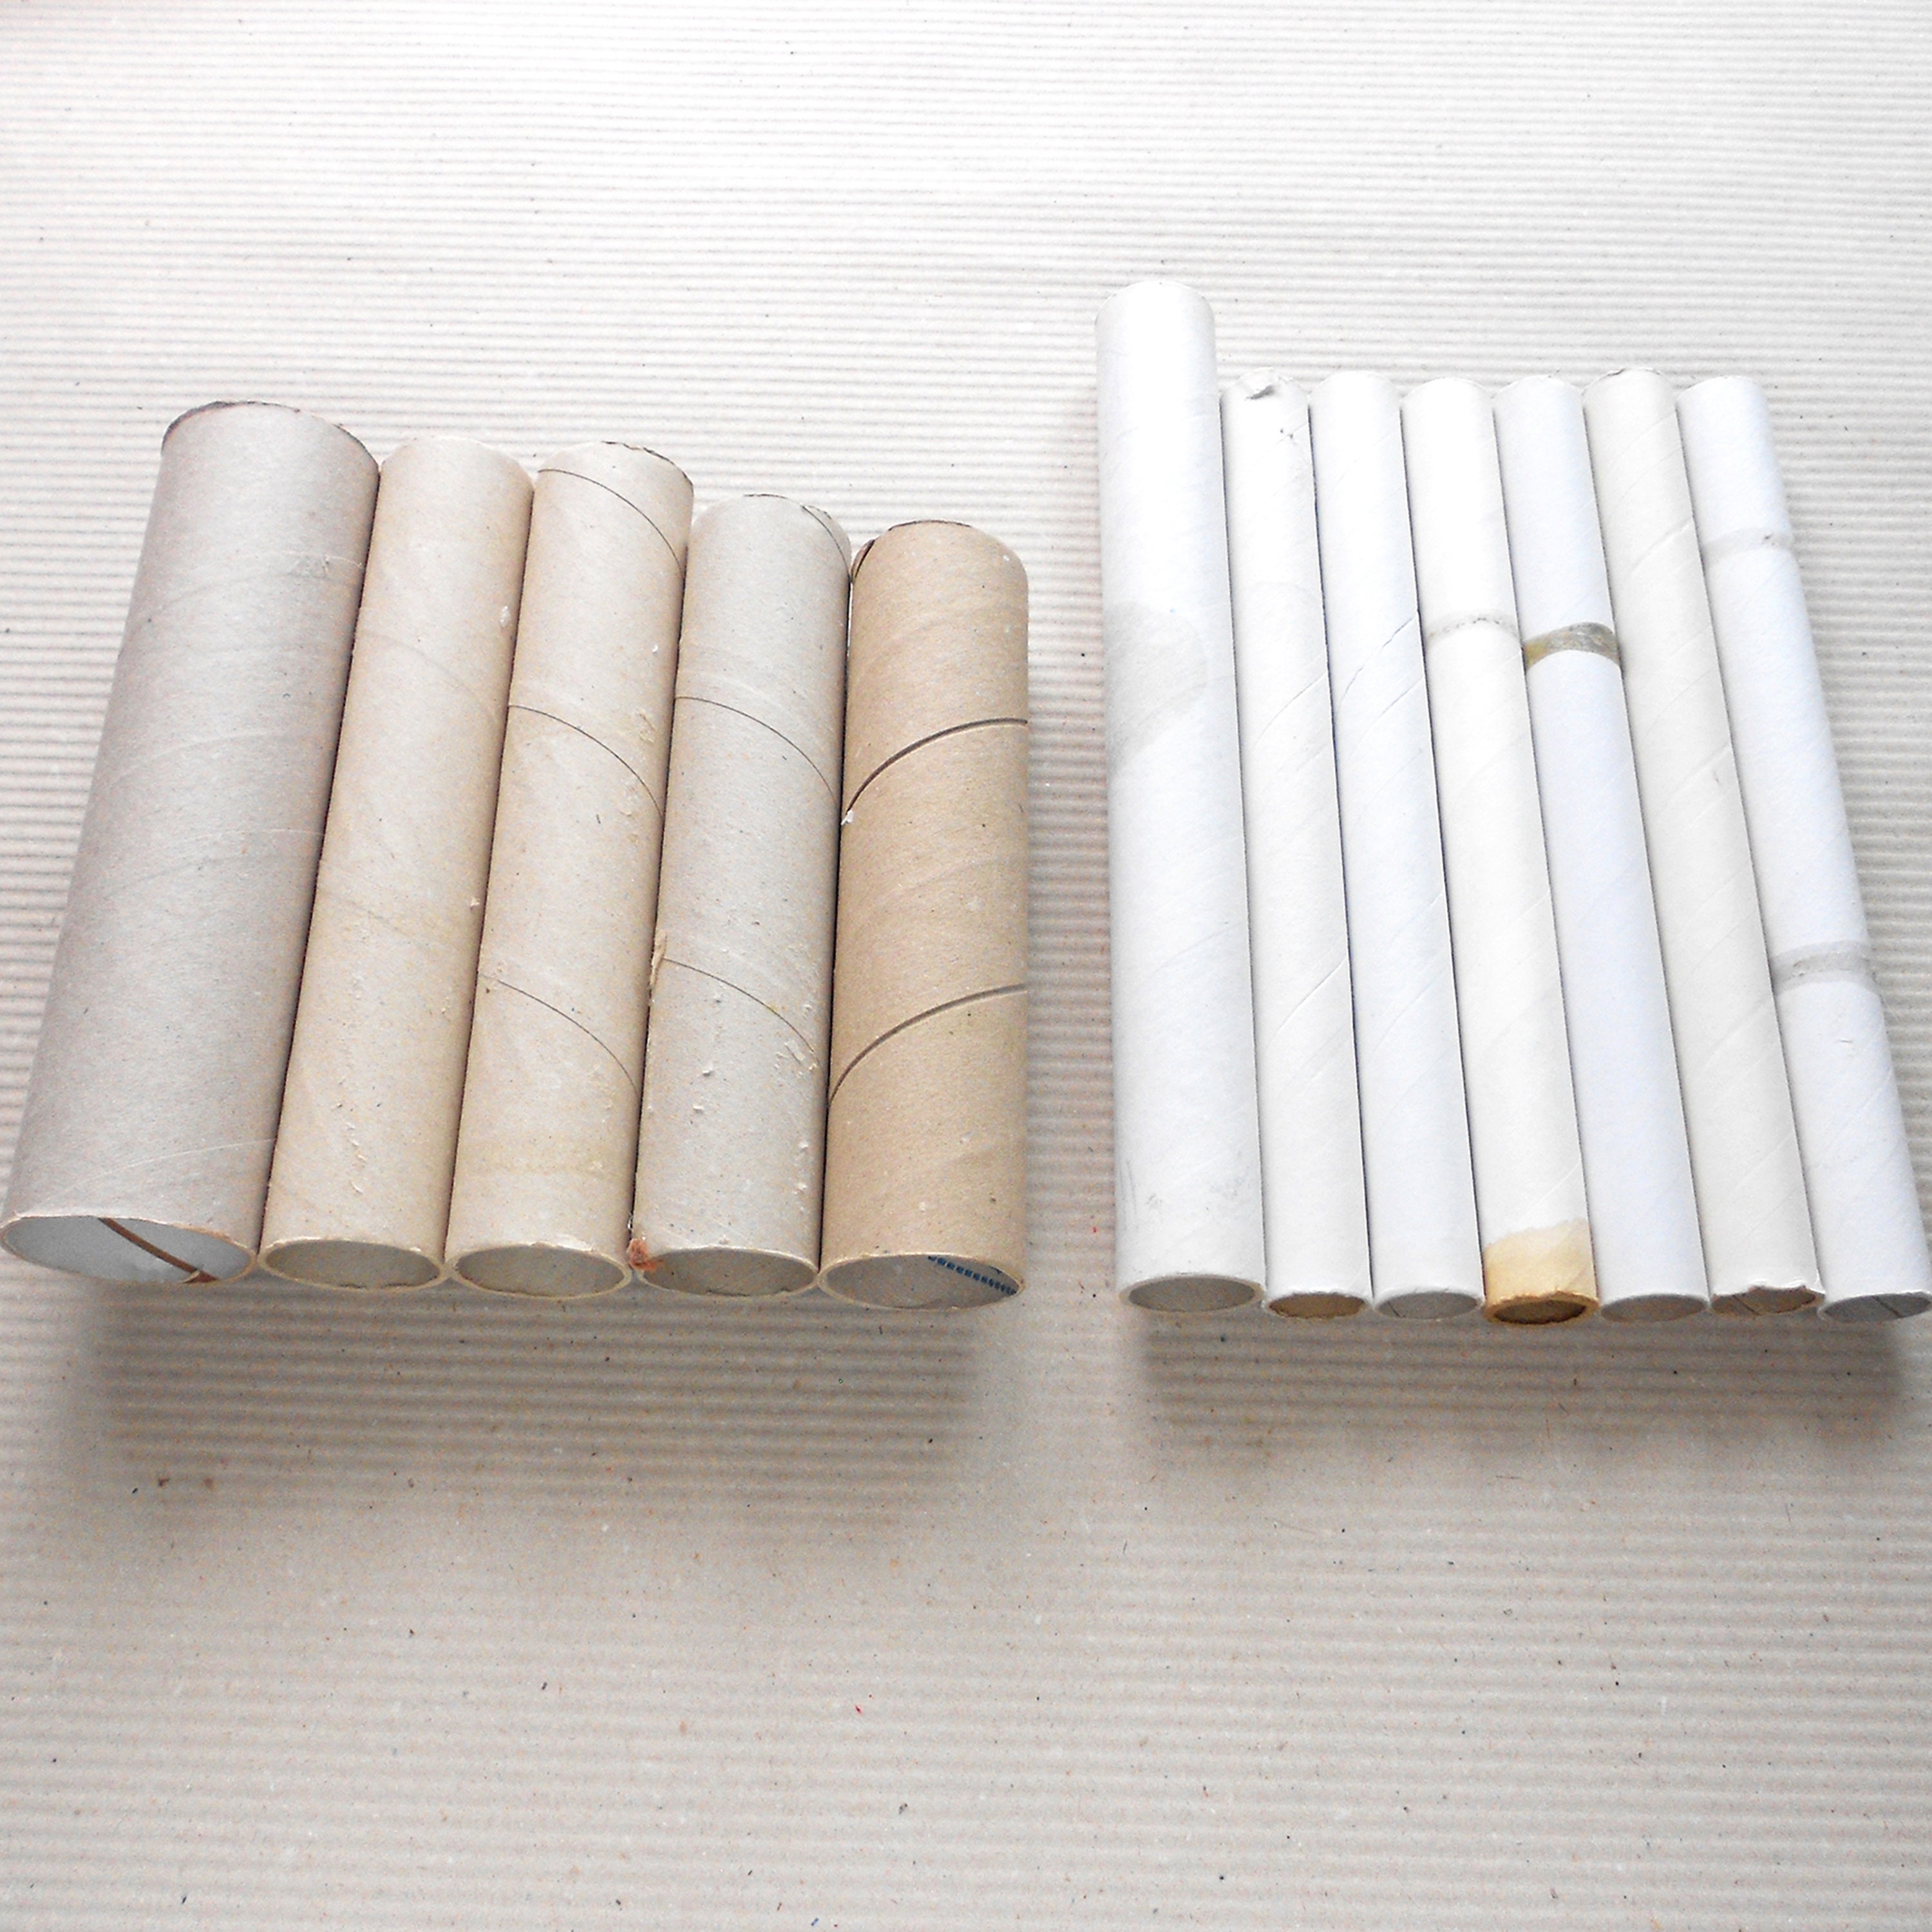 28 Ct Paper Tube Set, Cardboard Rolls with 14 Pieces Indonesia